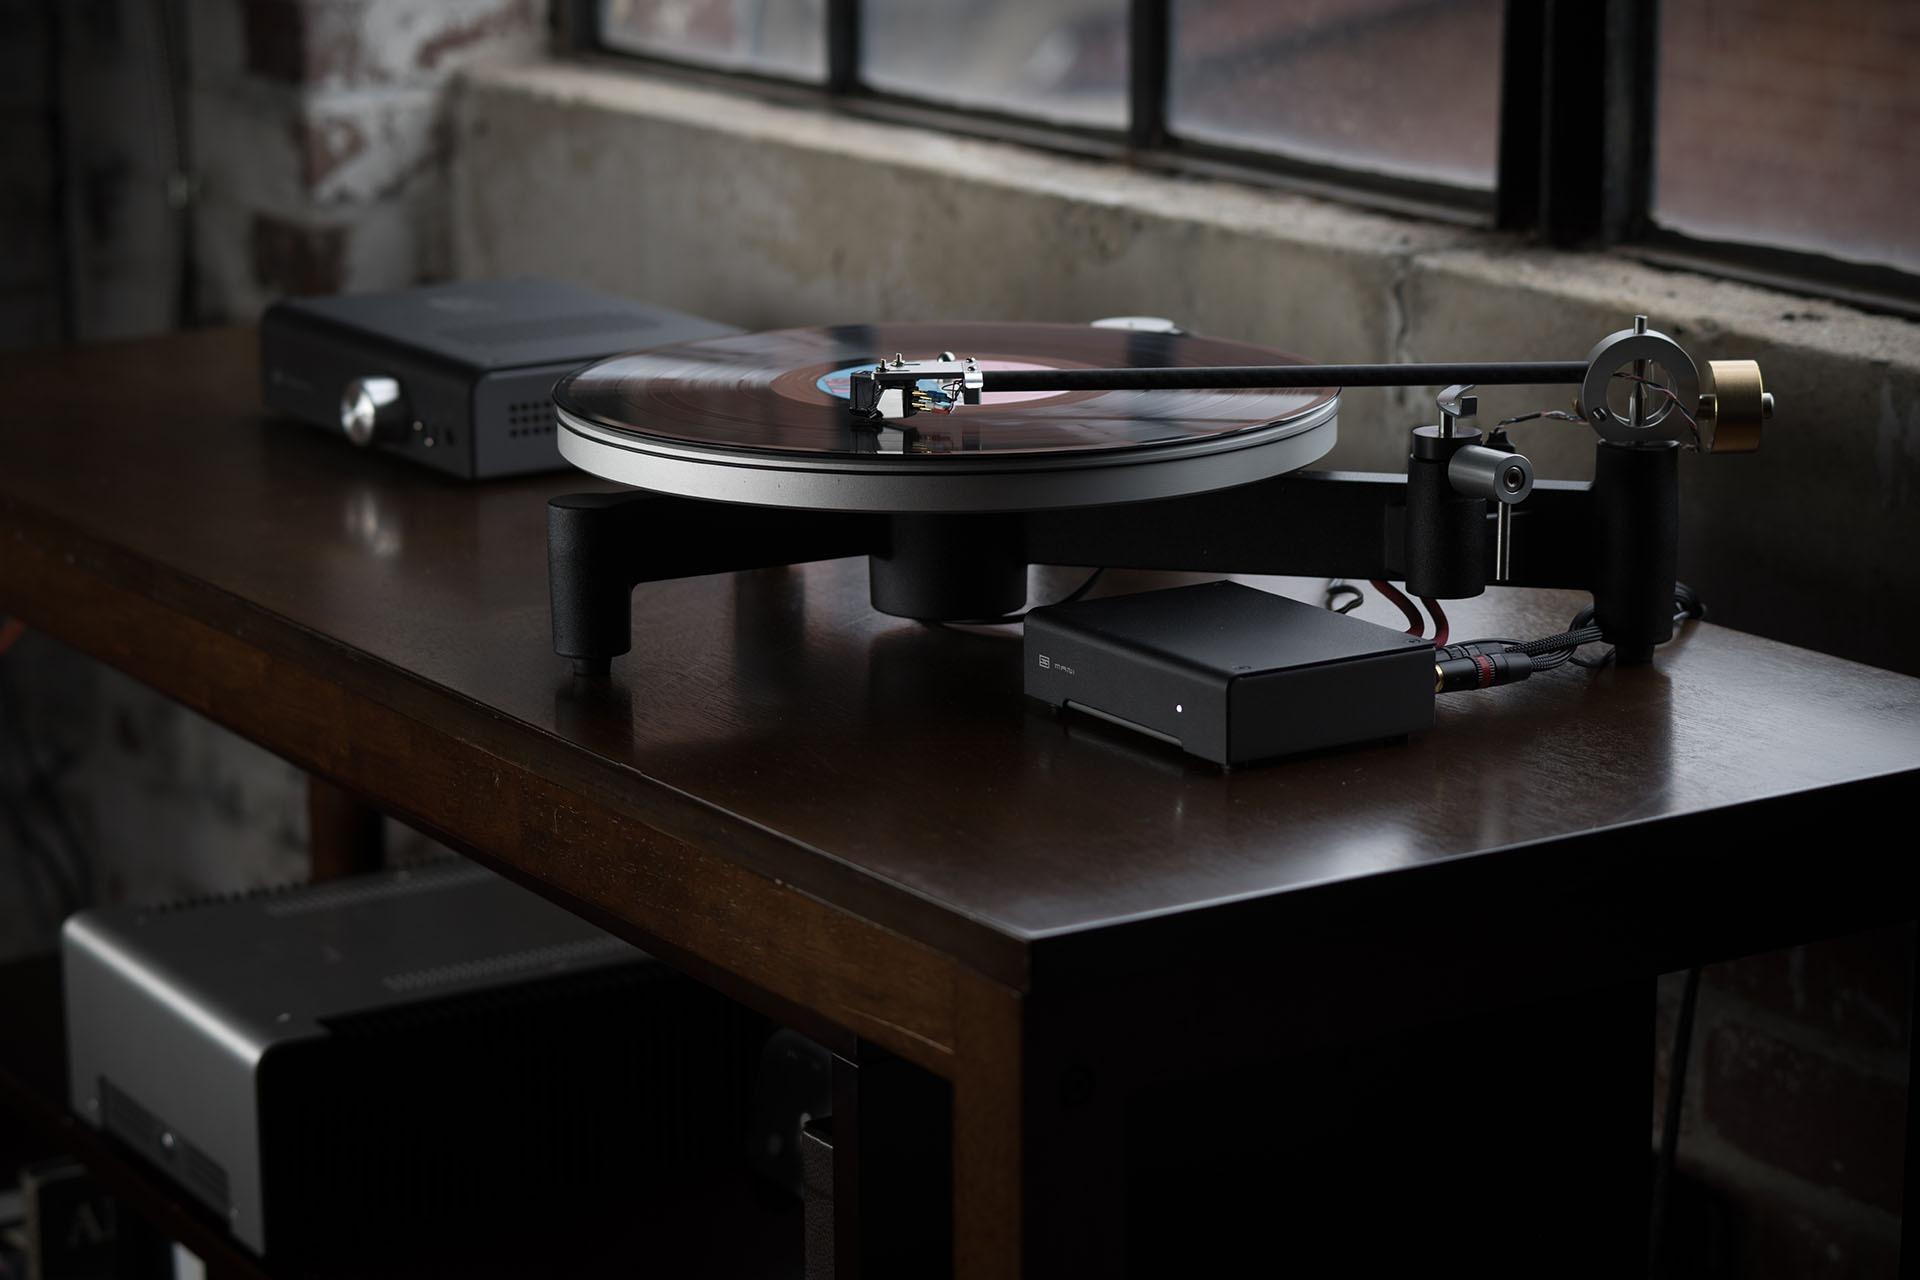 Chris Martens samples Schiit's flagship Sol turntable, with Mani phono preamp and Grado cartridge, and finds unprecedented sophistication and performance for the money. phono cartridges a7488480 sol insitu 1920